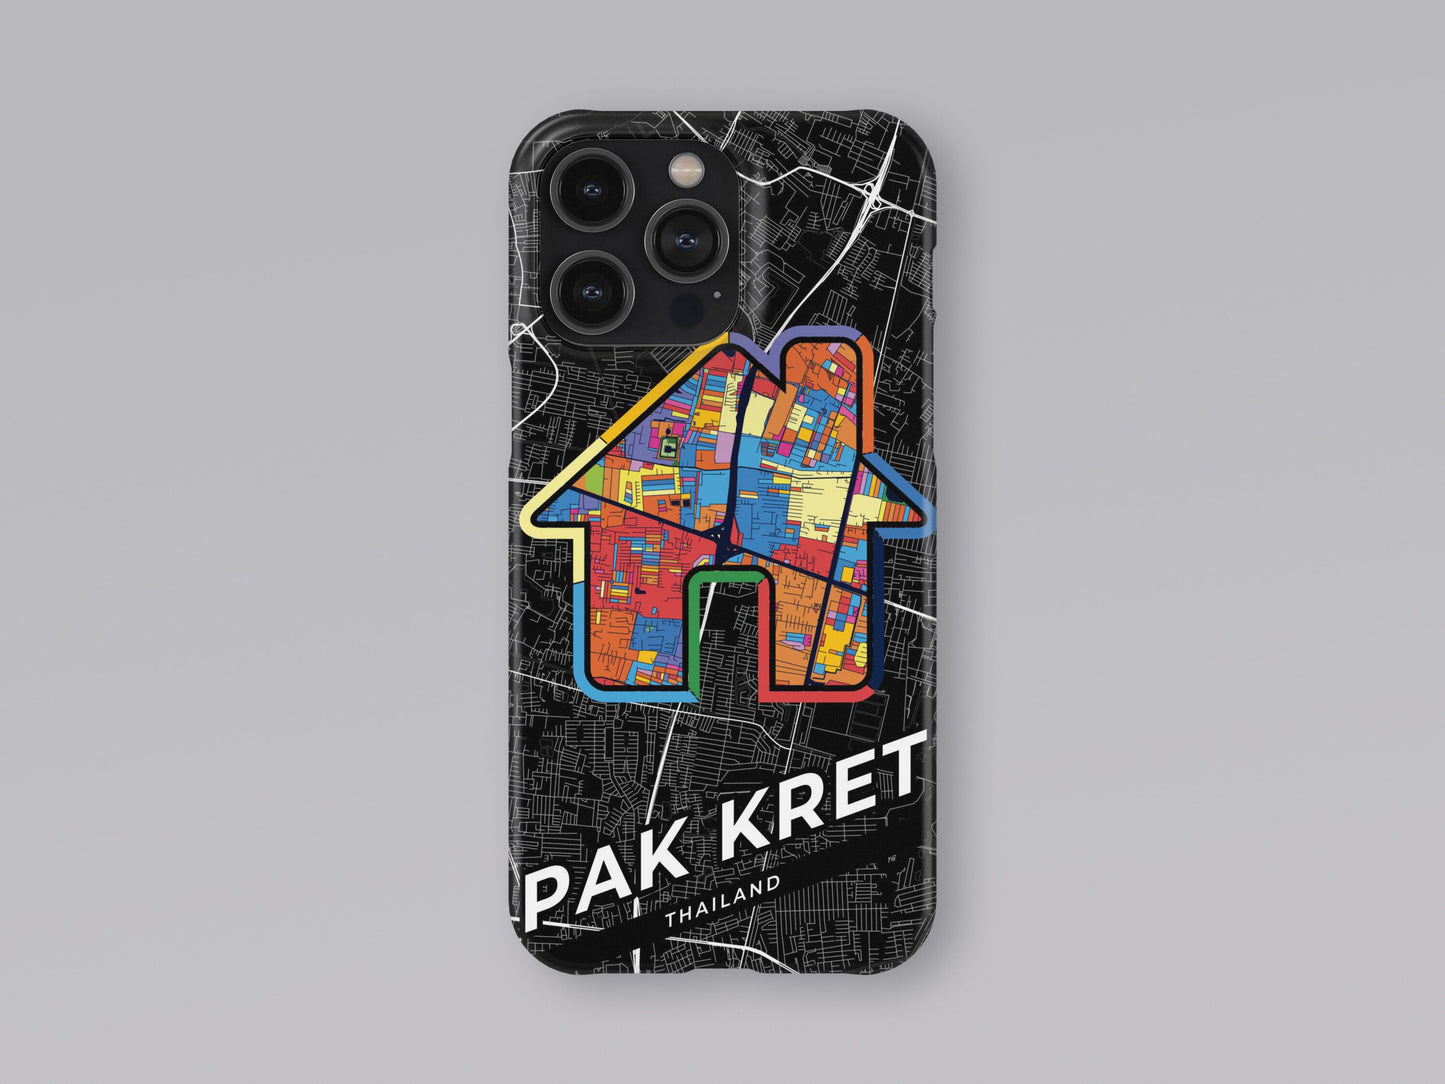 Pak Kret Thailand slim phone case with colorful icon 3